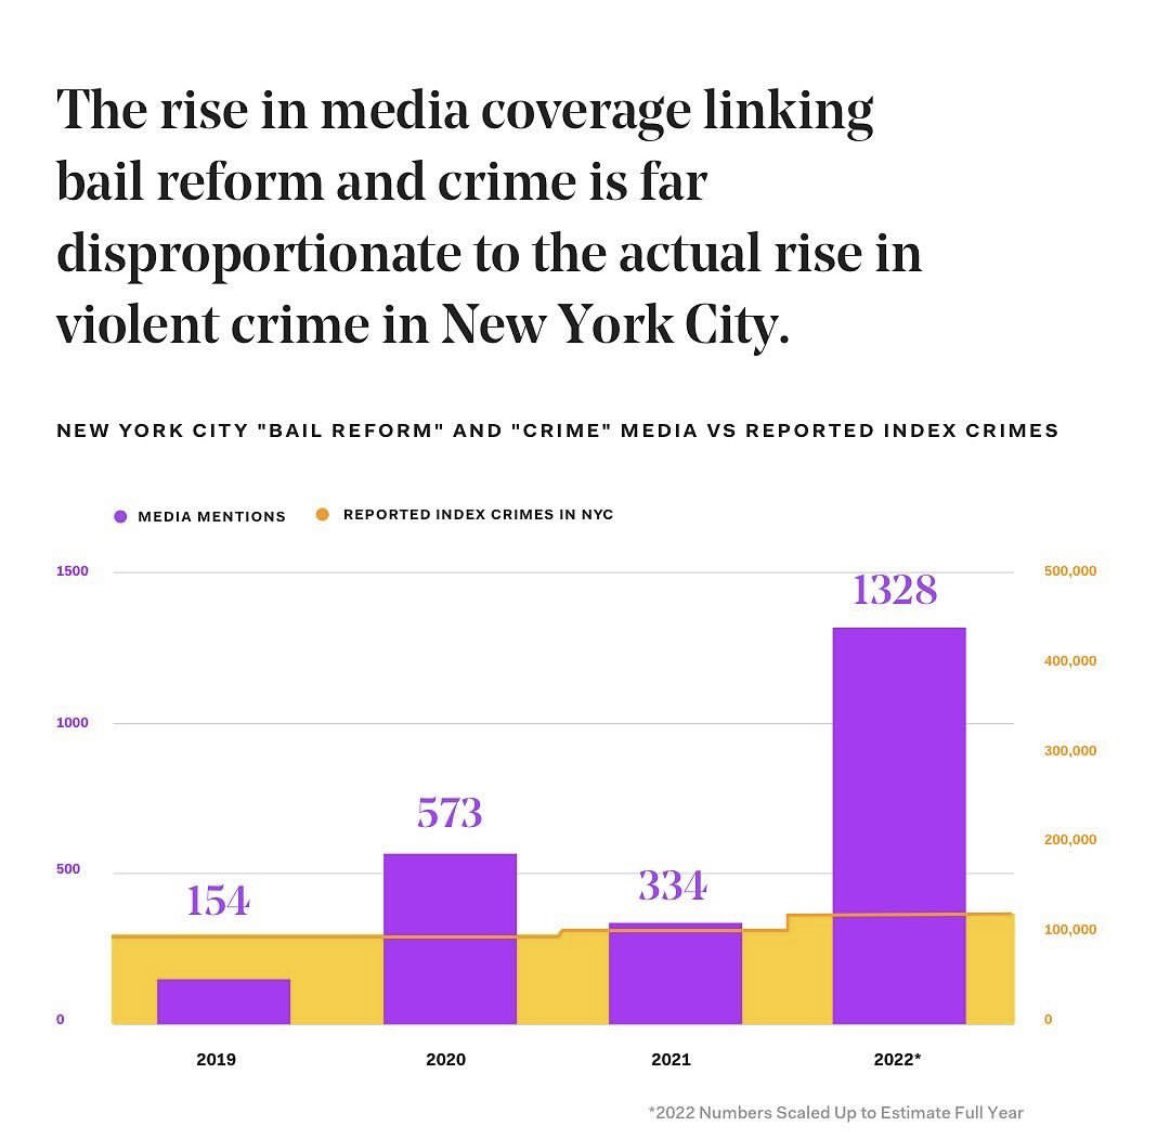 The data is clear - while rising crime is a great concern, the media's fixation with crime reporting is wildly disproportionate to reality. We must improve public safety in the context of actual facts, not sensationalism. Thanks to @_AlanaSivin @fwdus for putting this together